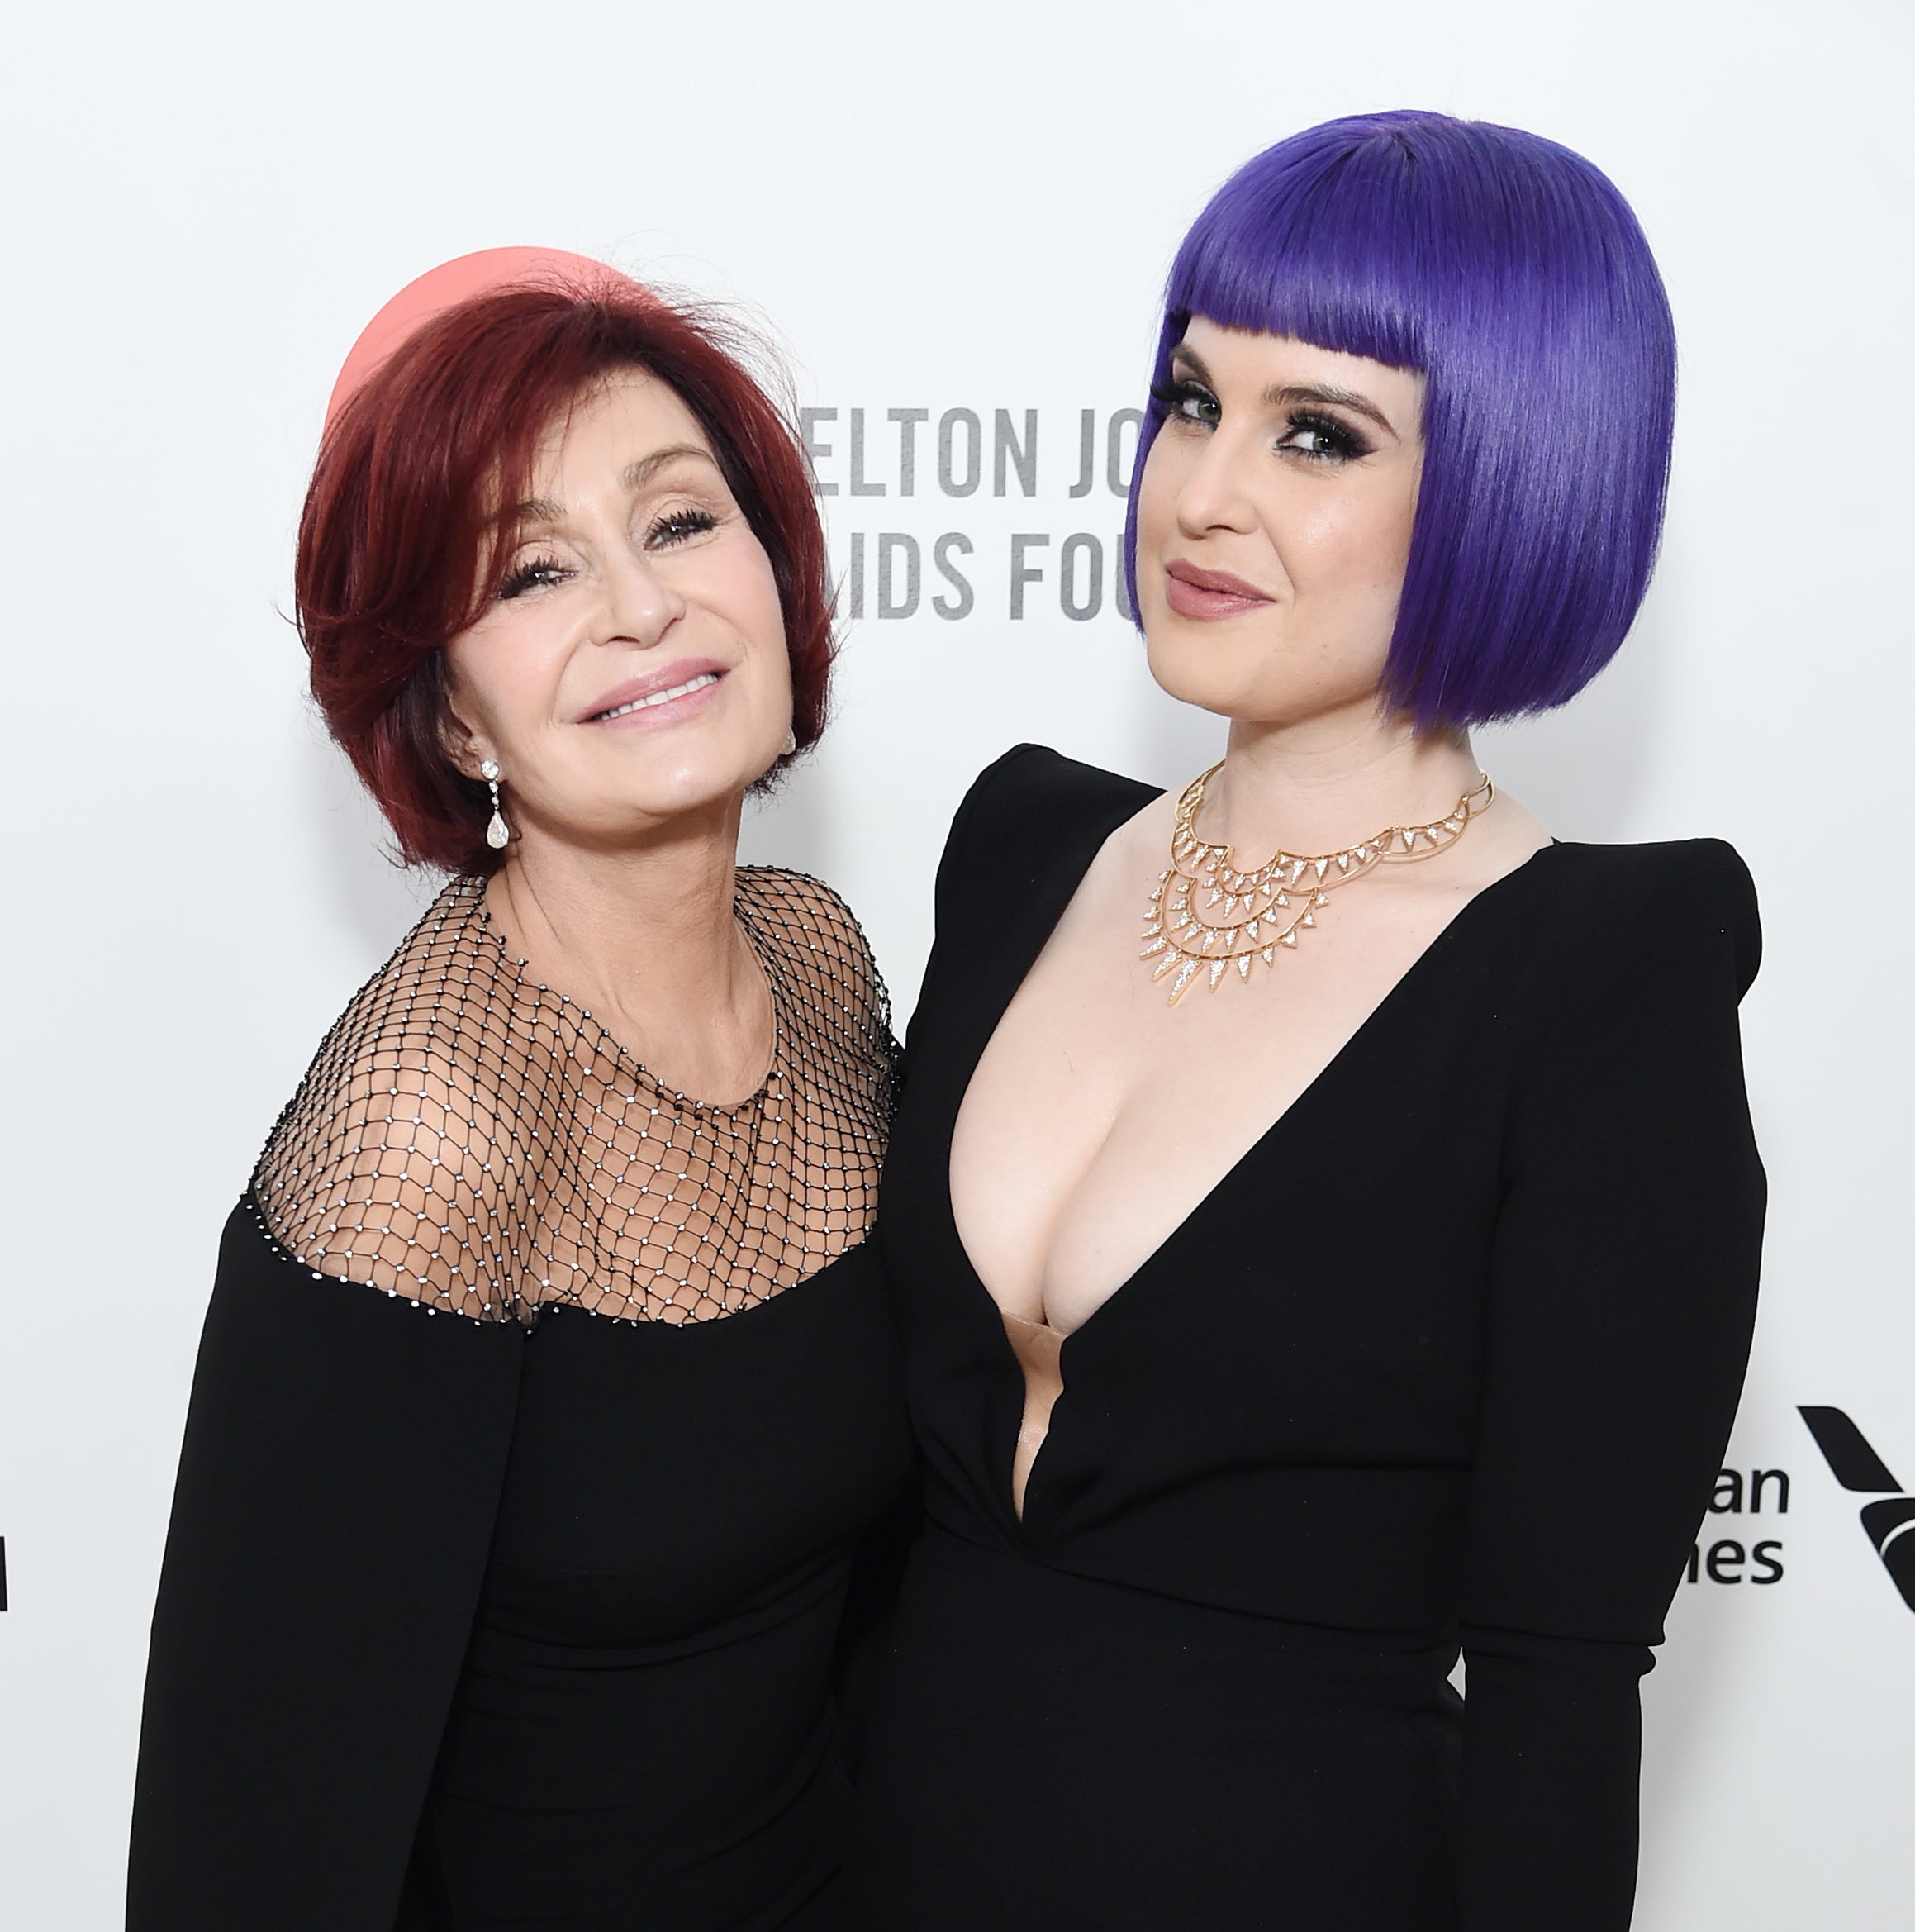 Sharon and Kelly Osbourne posing at a media event